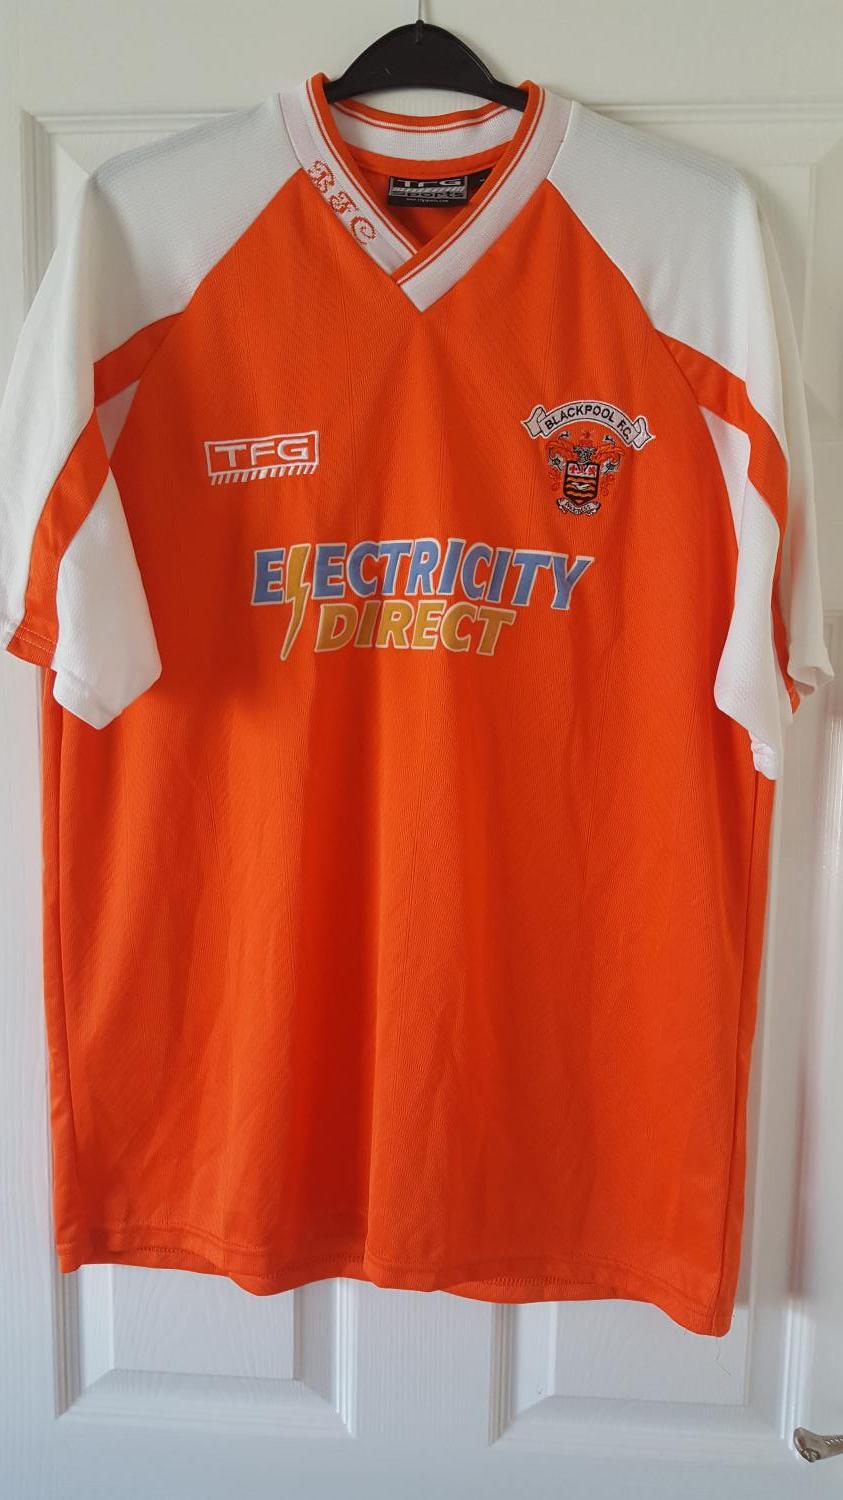 Blackpool Home football shirt 2001 - 2003. Sponsored by Electricity Direct